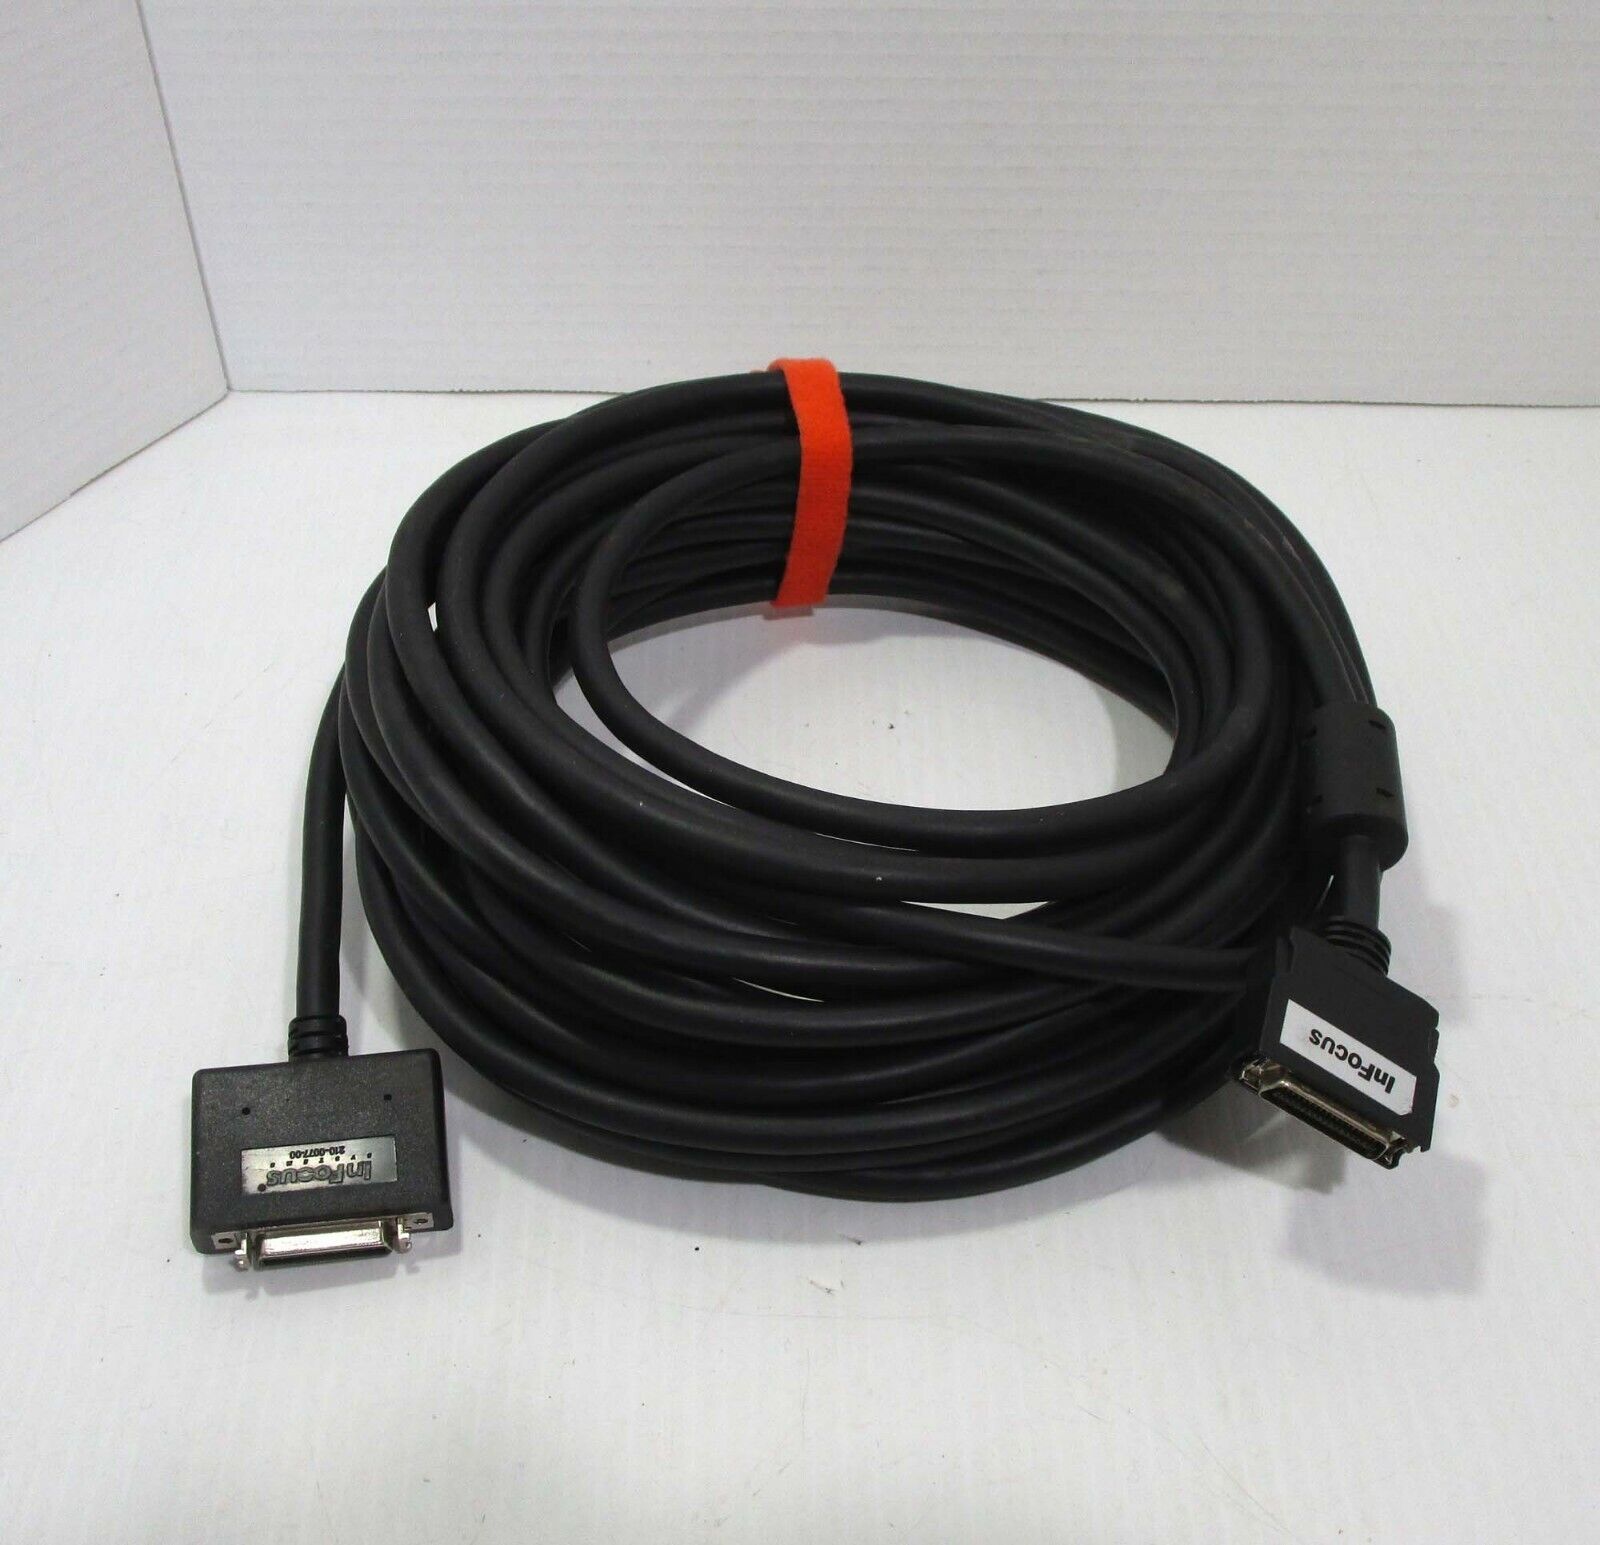 Infocus Cablewizard Projector Extension Cable - 40ft